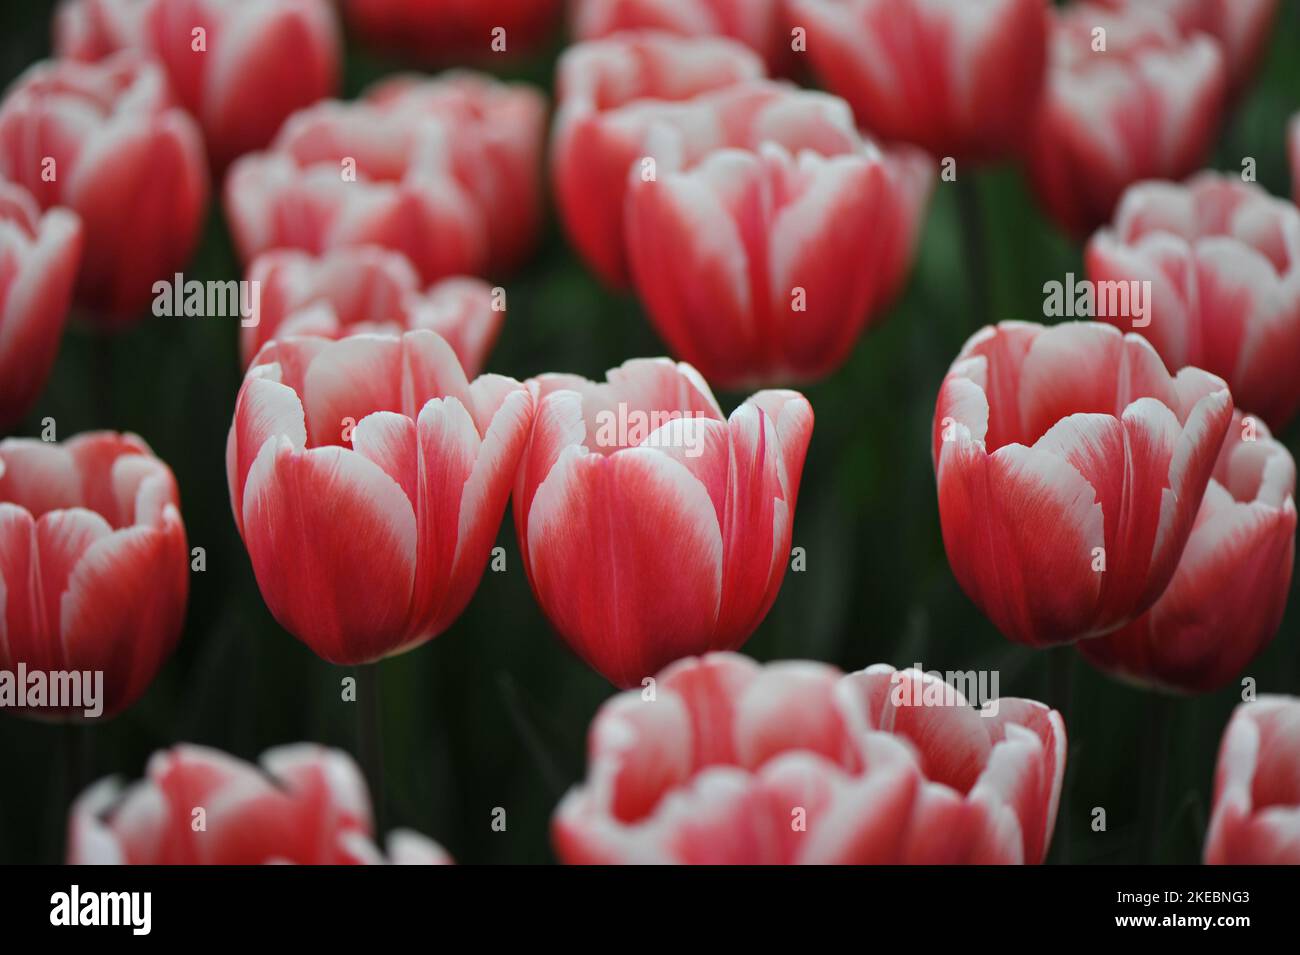 Red with white edges Triumph tulips (Tulipa) Timeless bloom in a garden in March Stock Photo